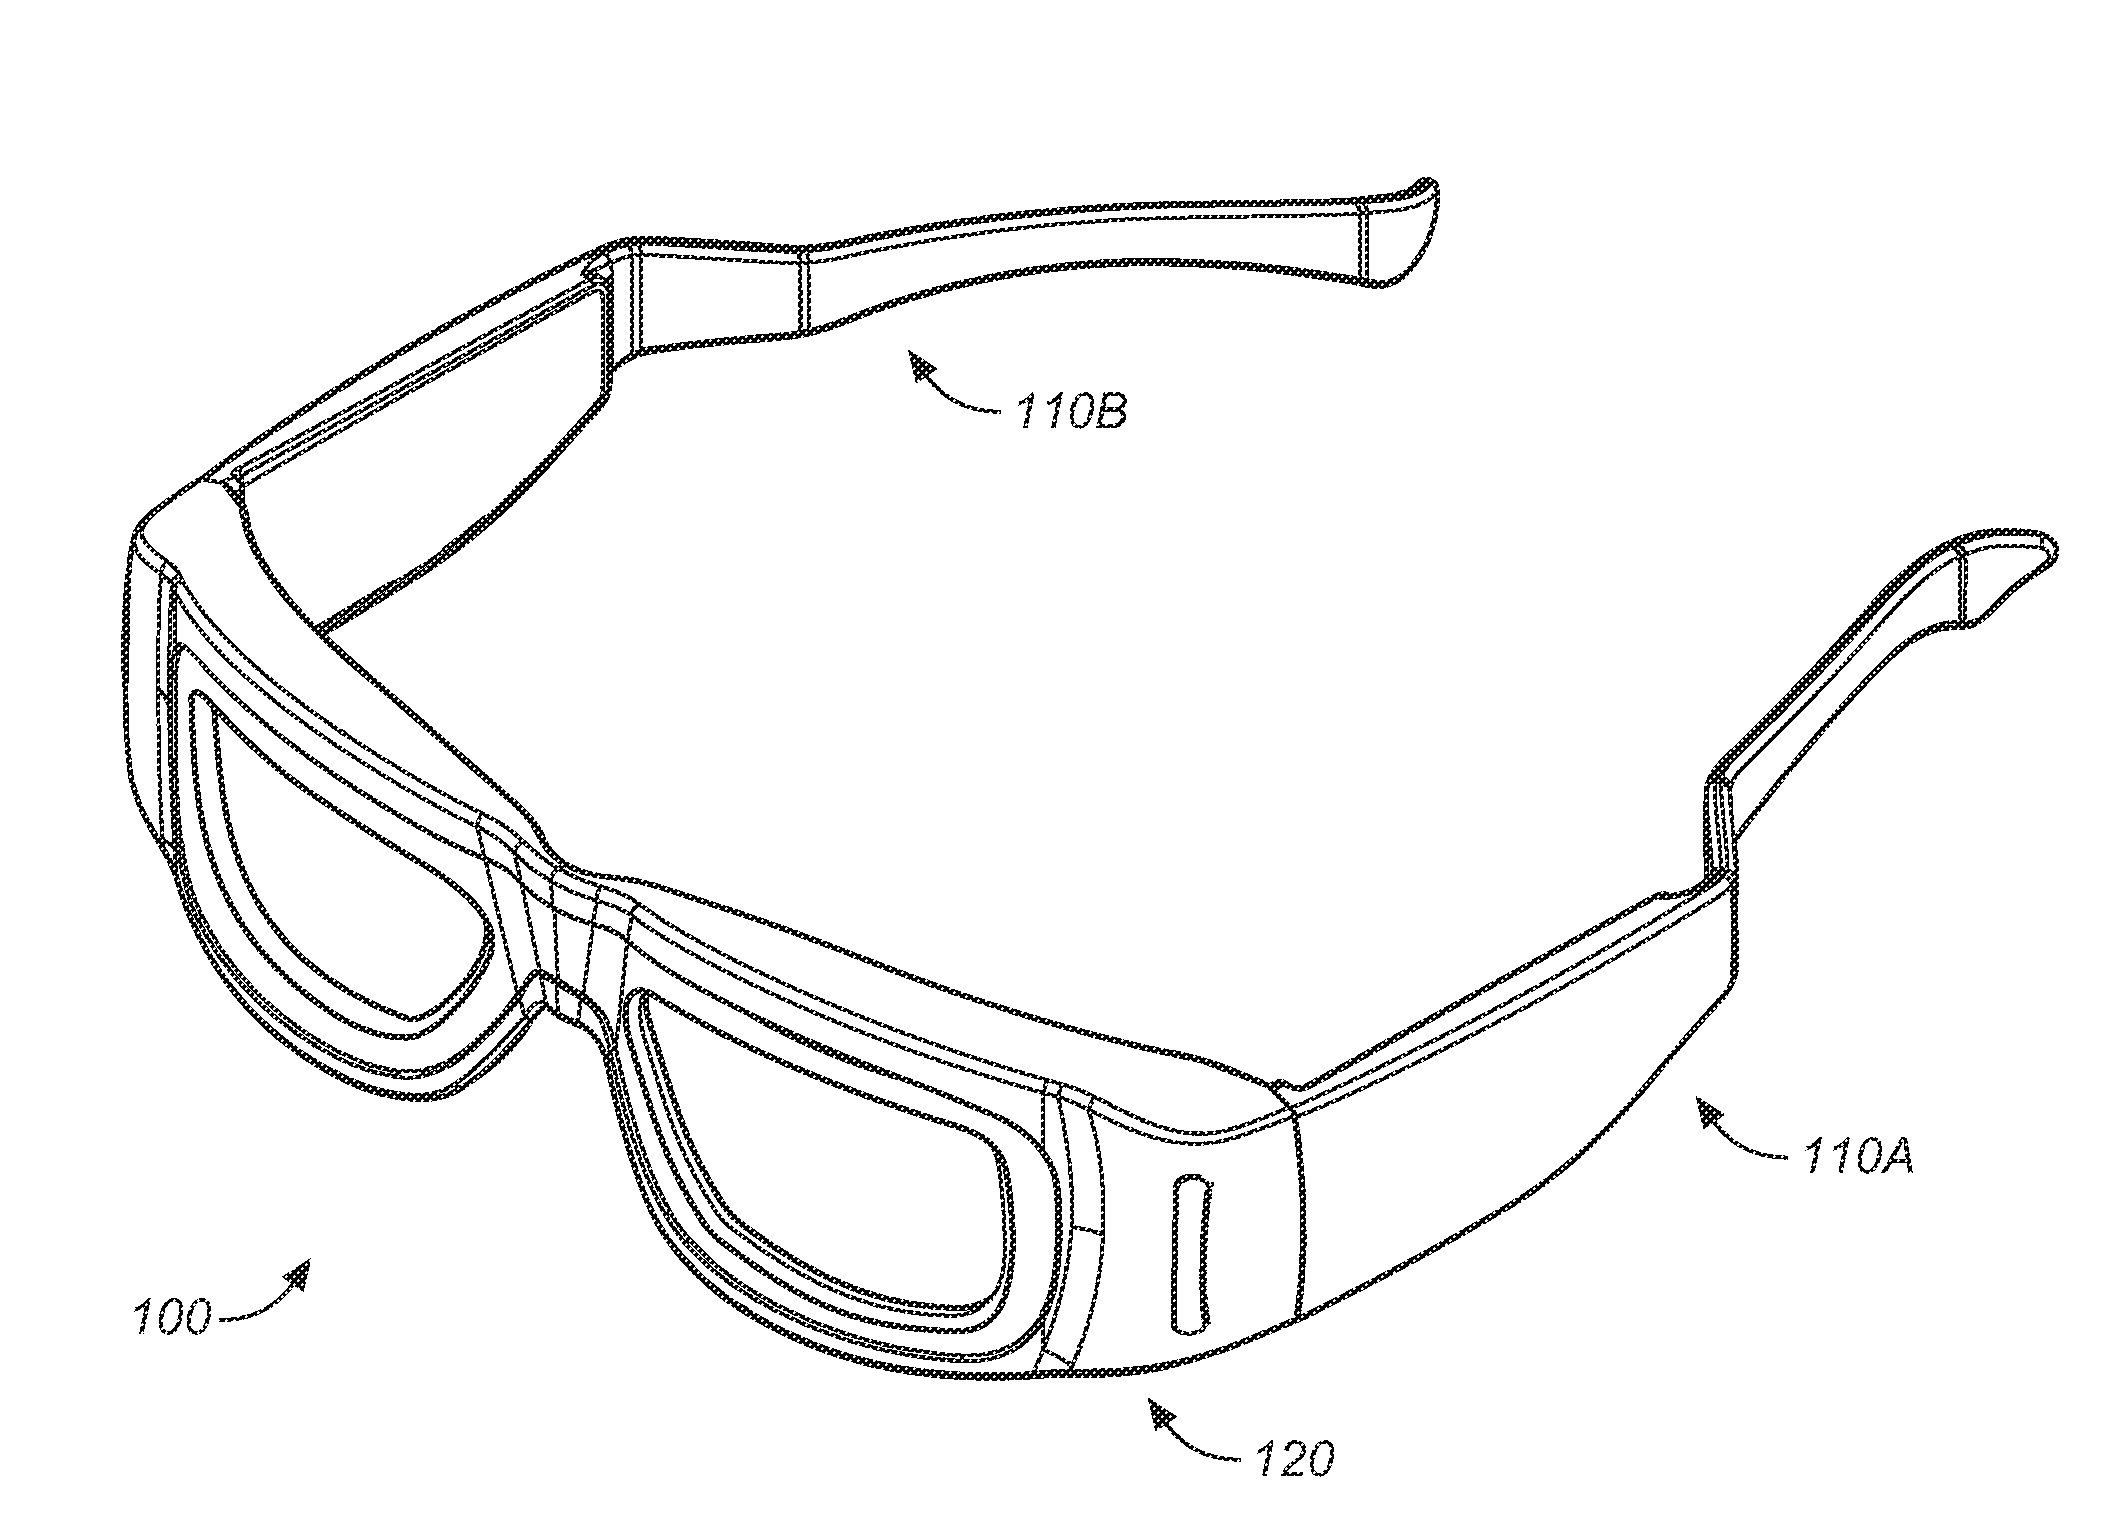 Eyeglasses for personal and commercial use including reuse in 3D theater and other repeated operations